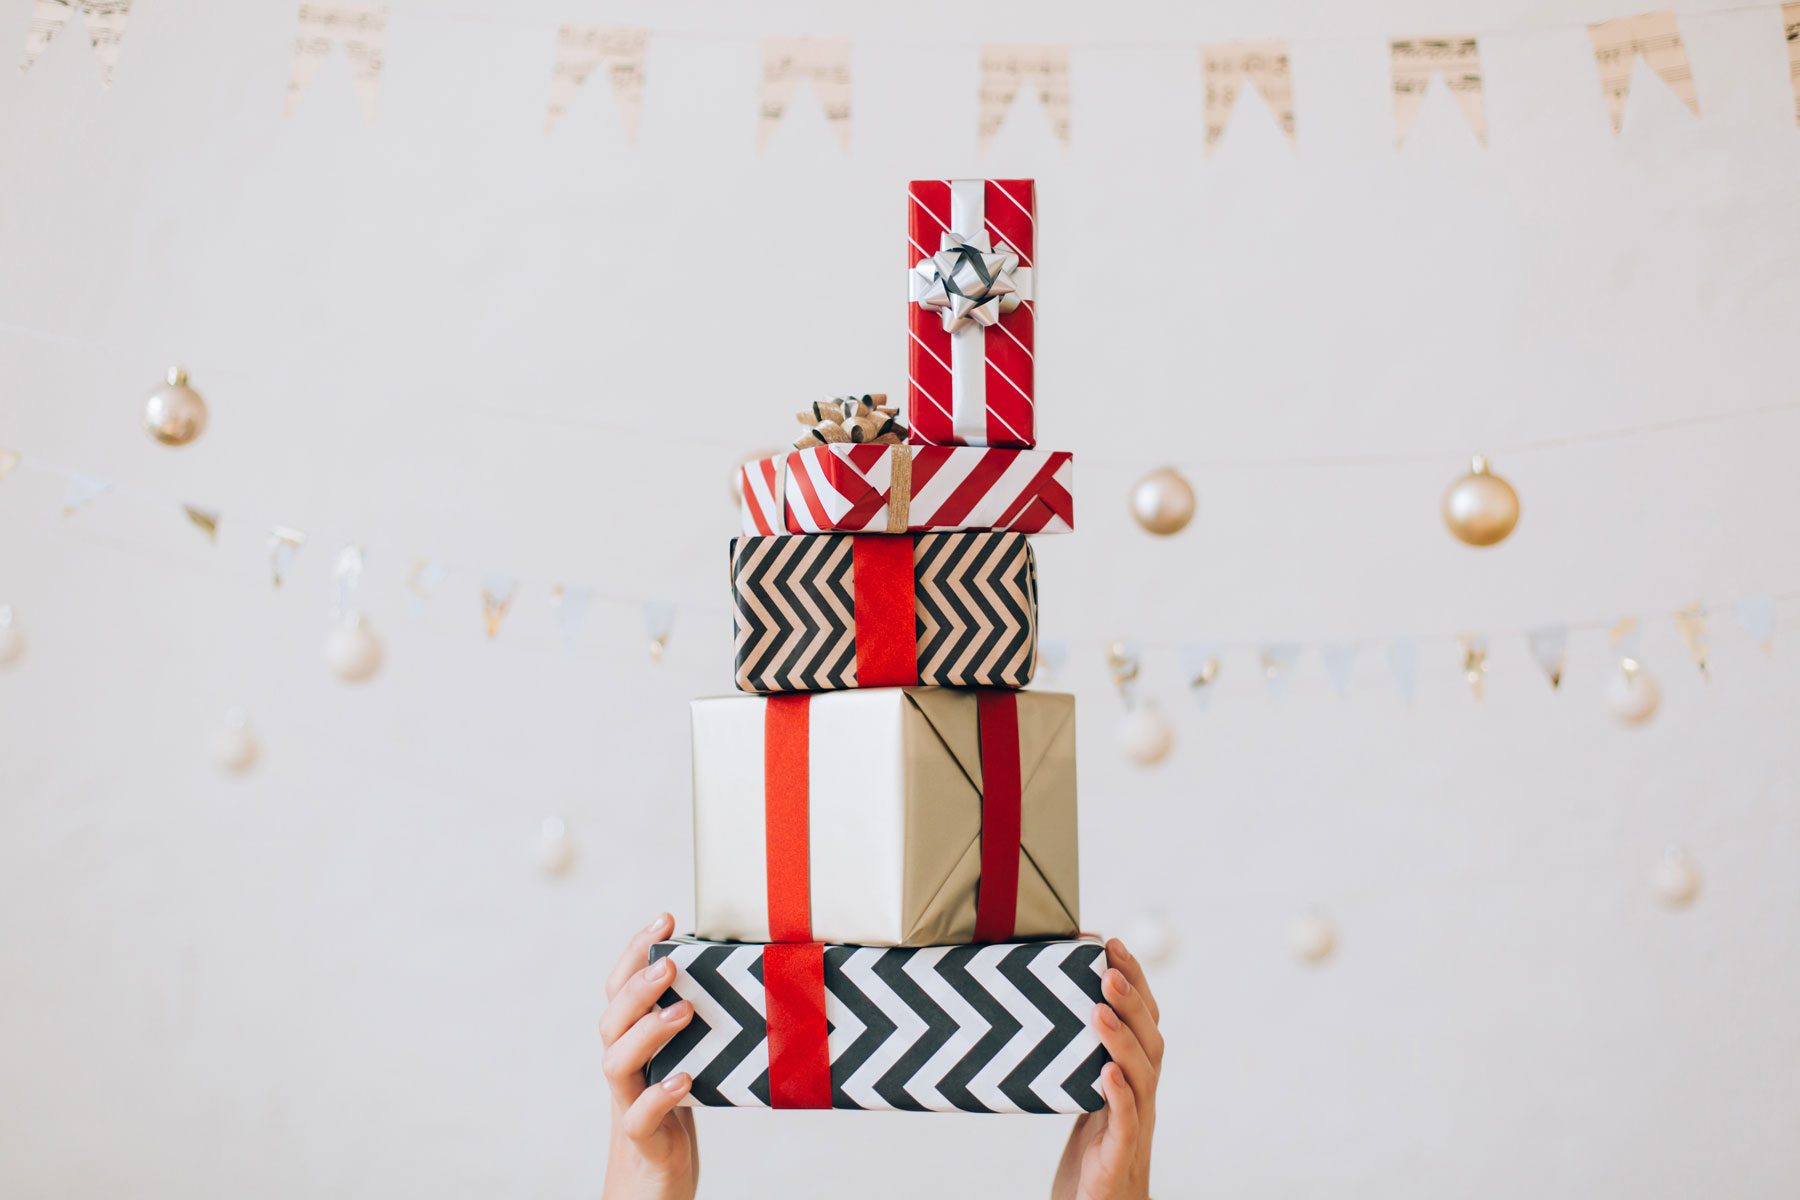 anonymous Hands Are Holding up a Stack Of Gift Boxes With Bows Against White Wall With Garlands On Strings